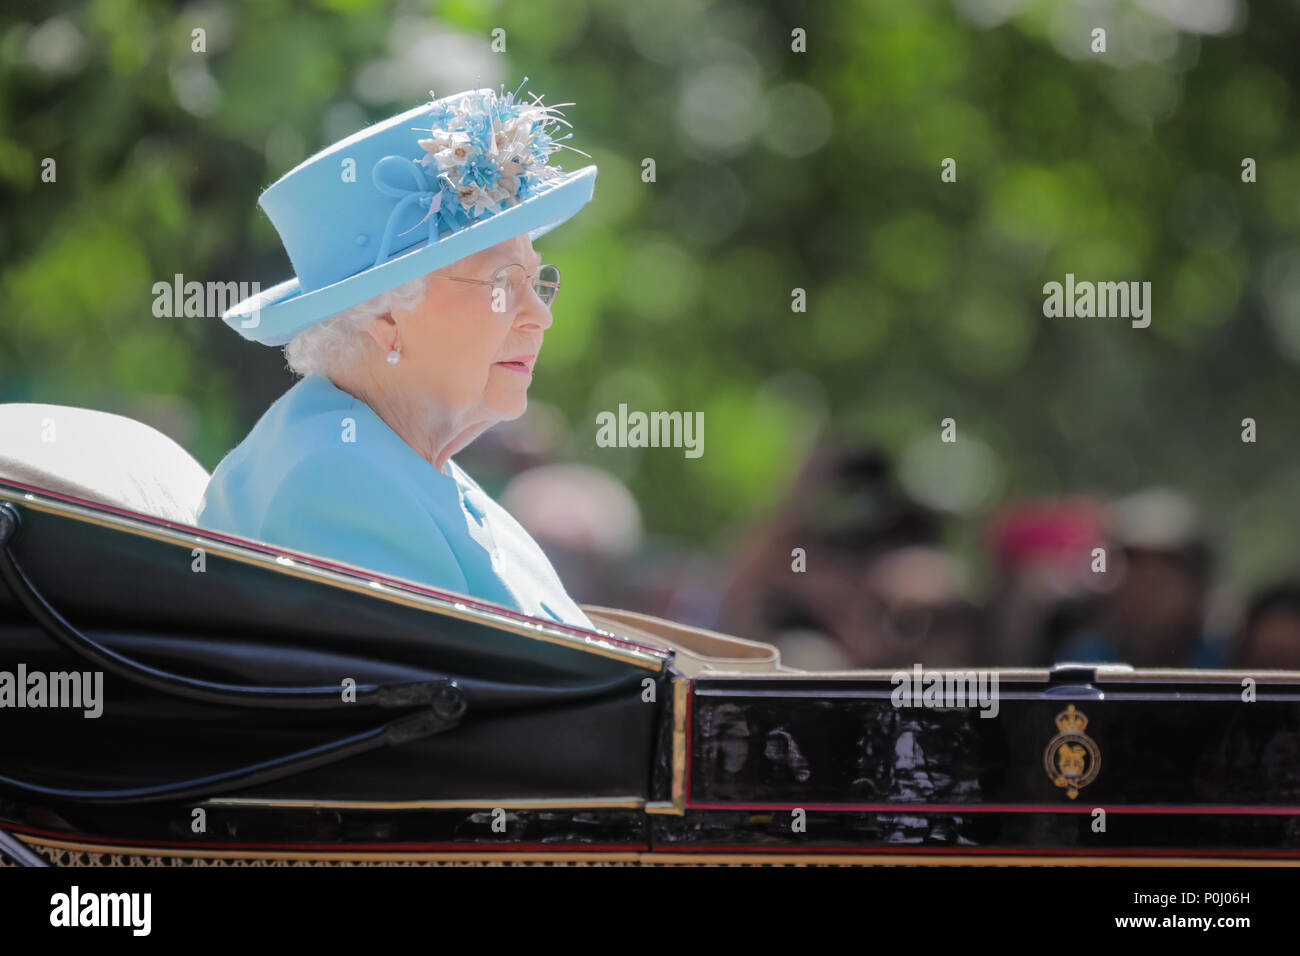 London, UK. 9th June 2018. HM Queen Elizabeth II rides alone in a horse drawn carriage in the procession along The Mall at Trooping the Colour, The Queens Birthday Parade. London. Credit: amanda rose/Alamy Live News Stock Photo